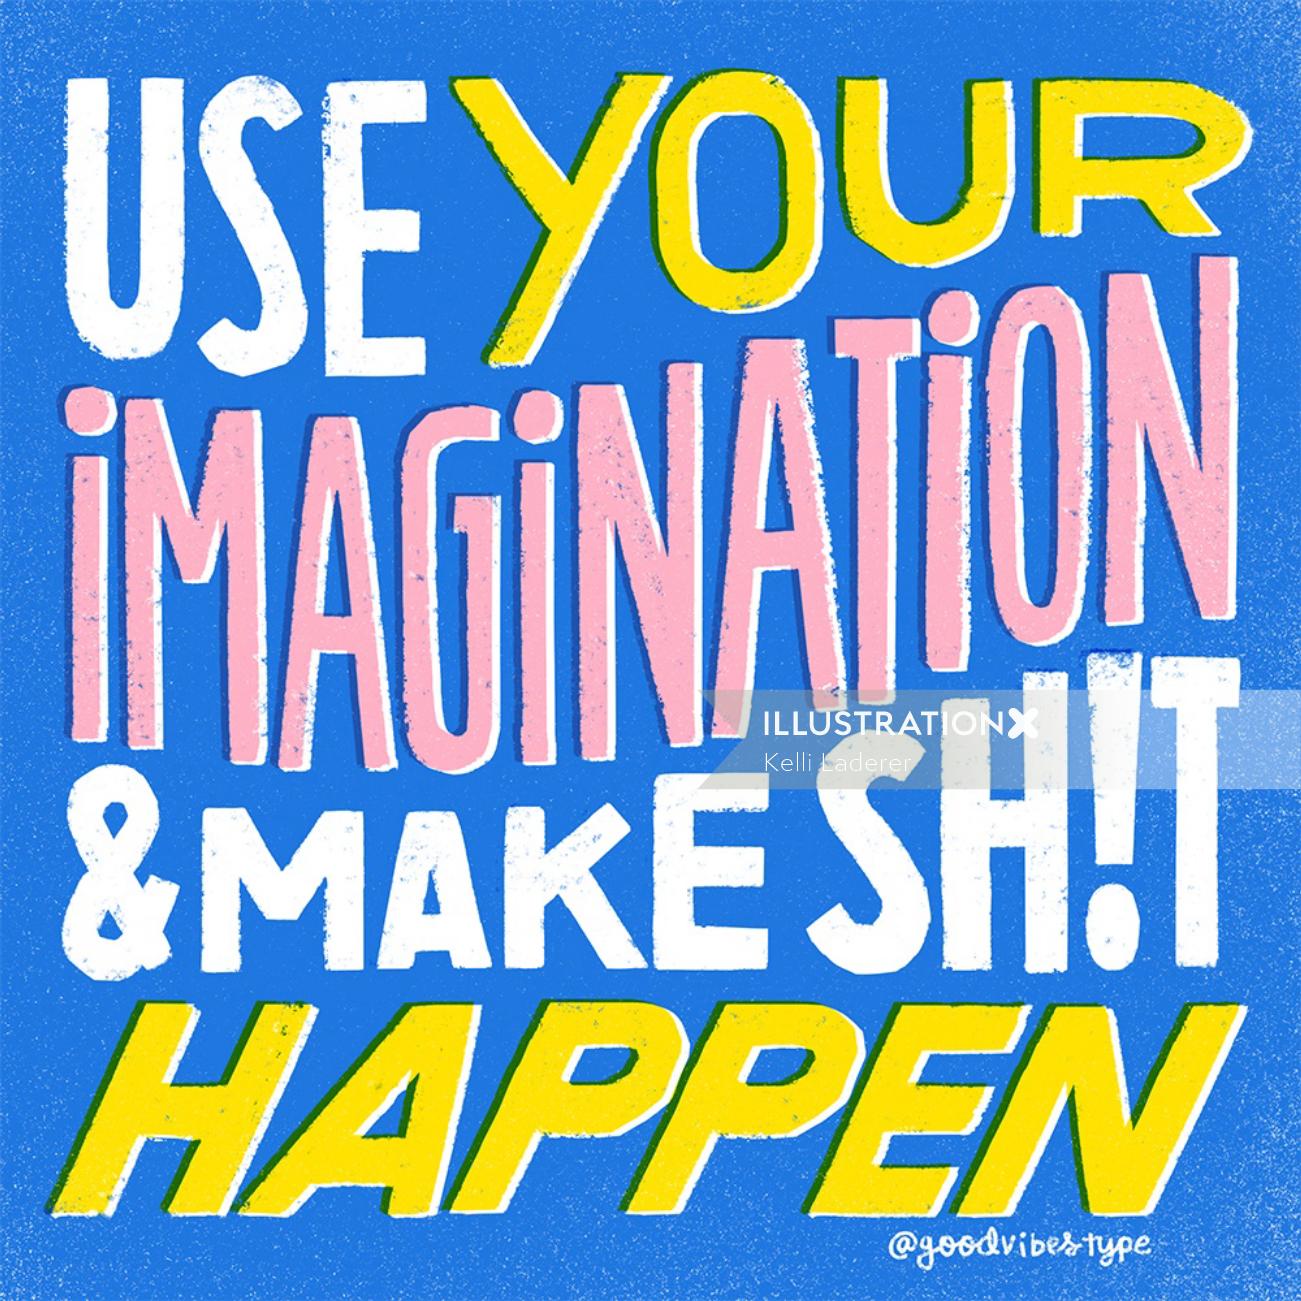 Use your imagination and make shit happen